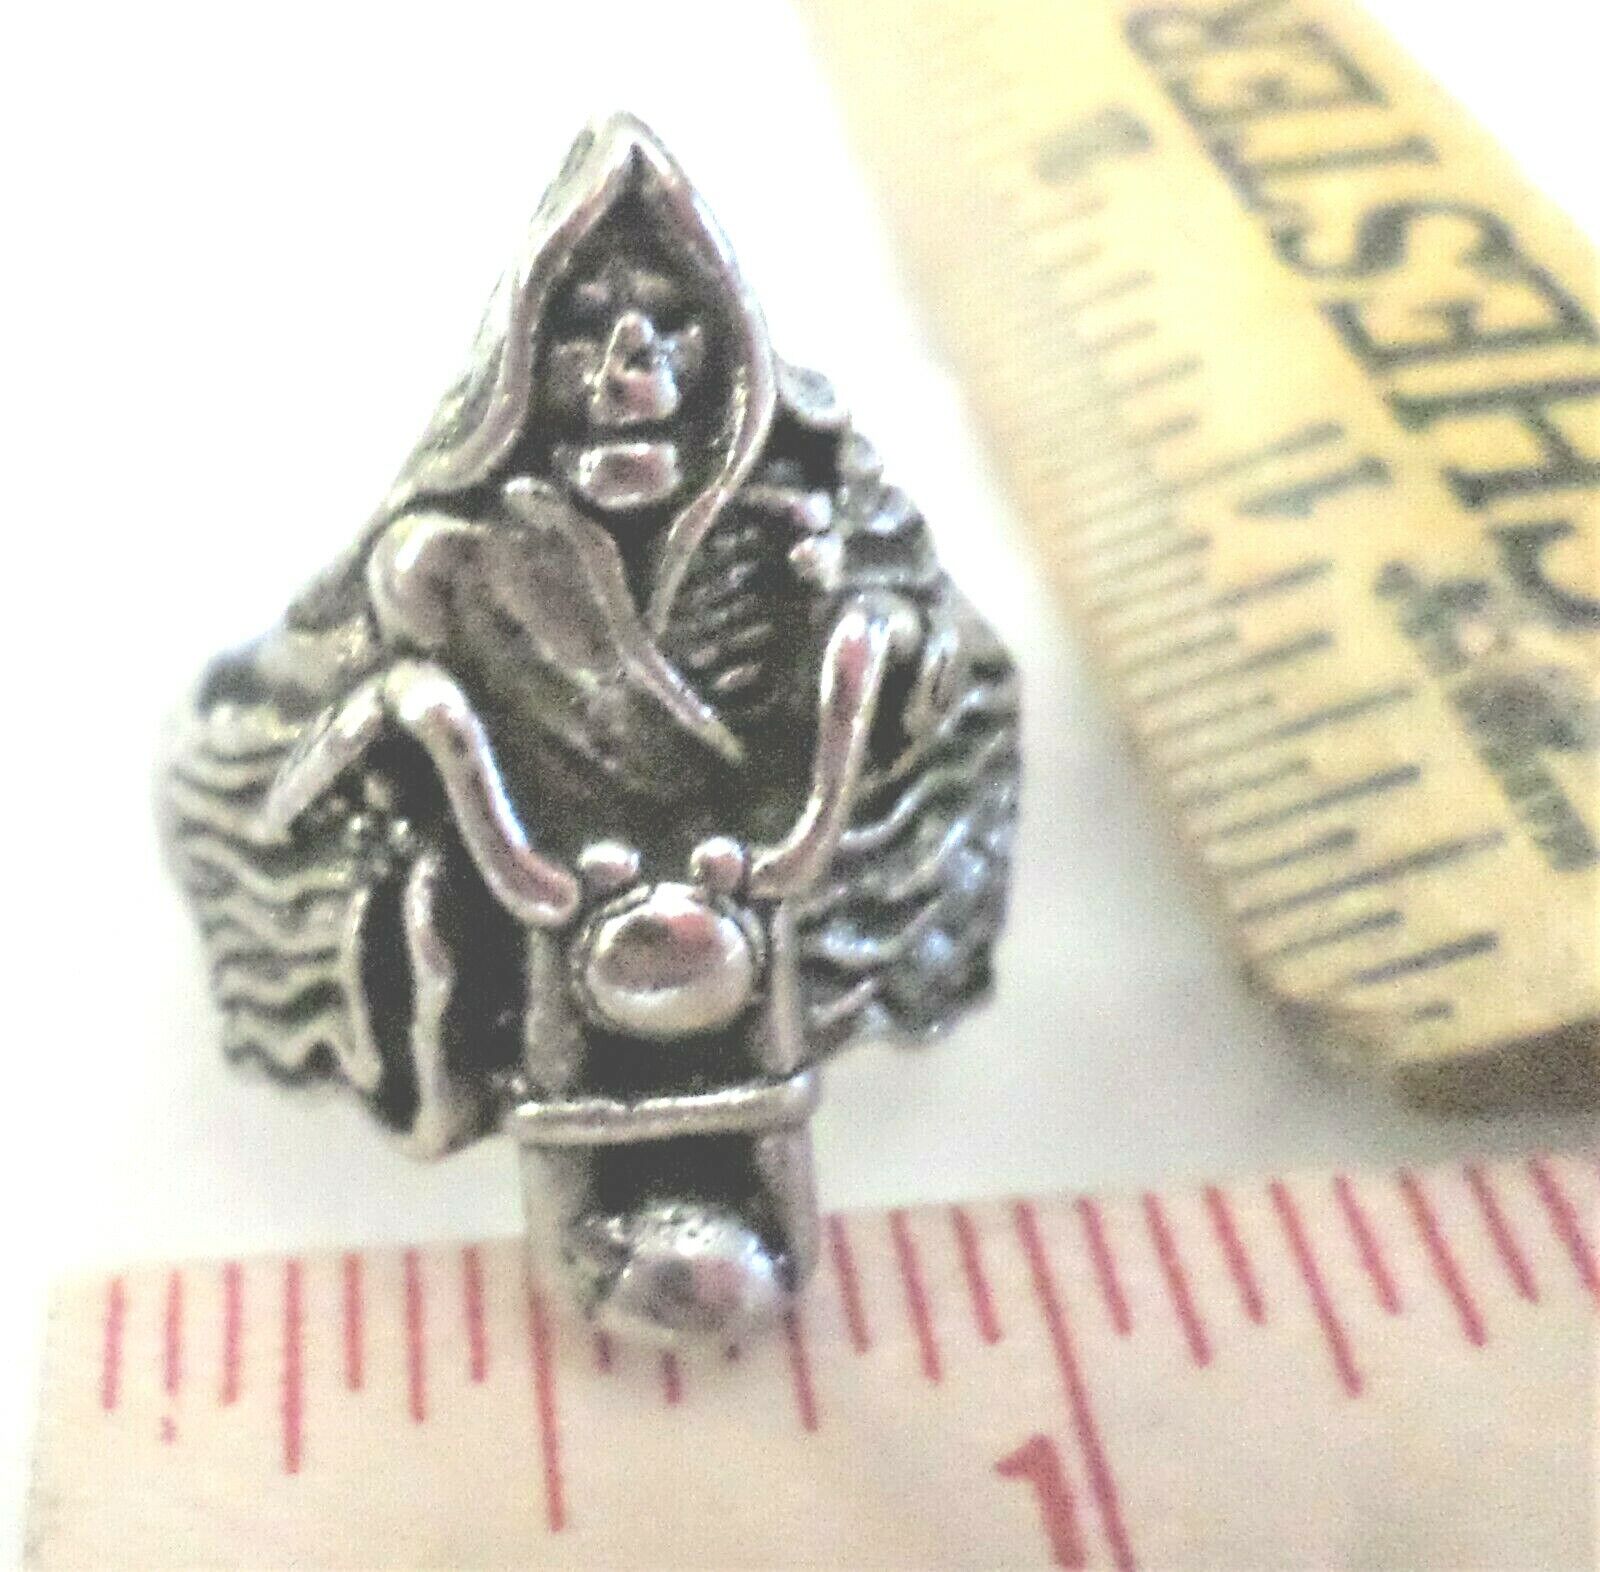 Unusual Grim Reaper Ring Vintage Biker Collectible Old Mens Jewelry Size 11&1/2